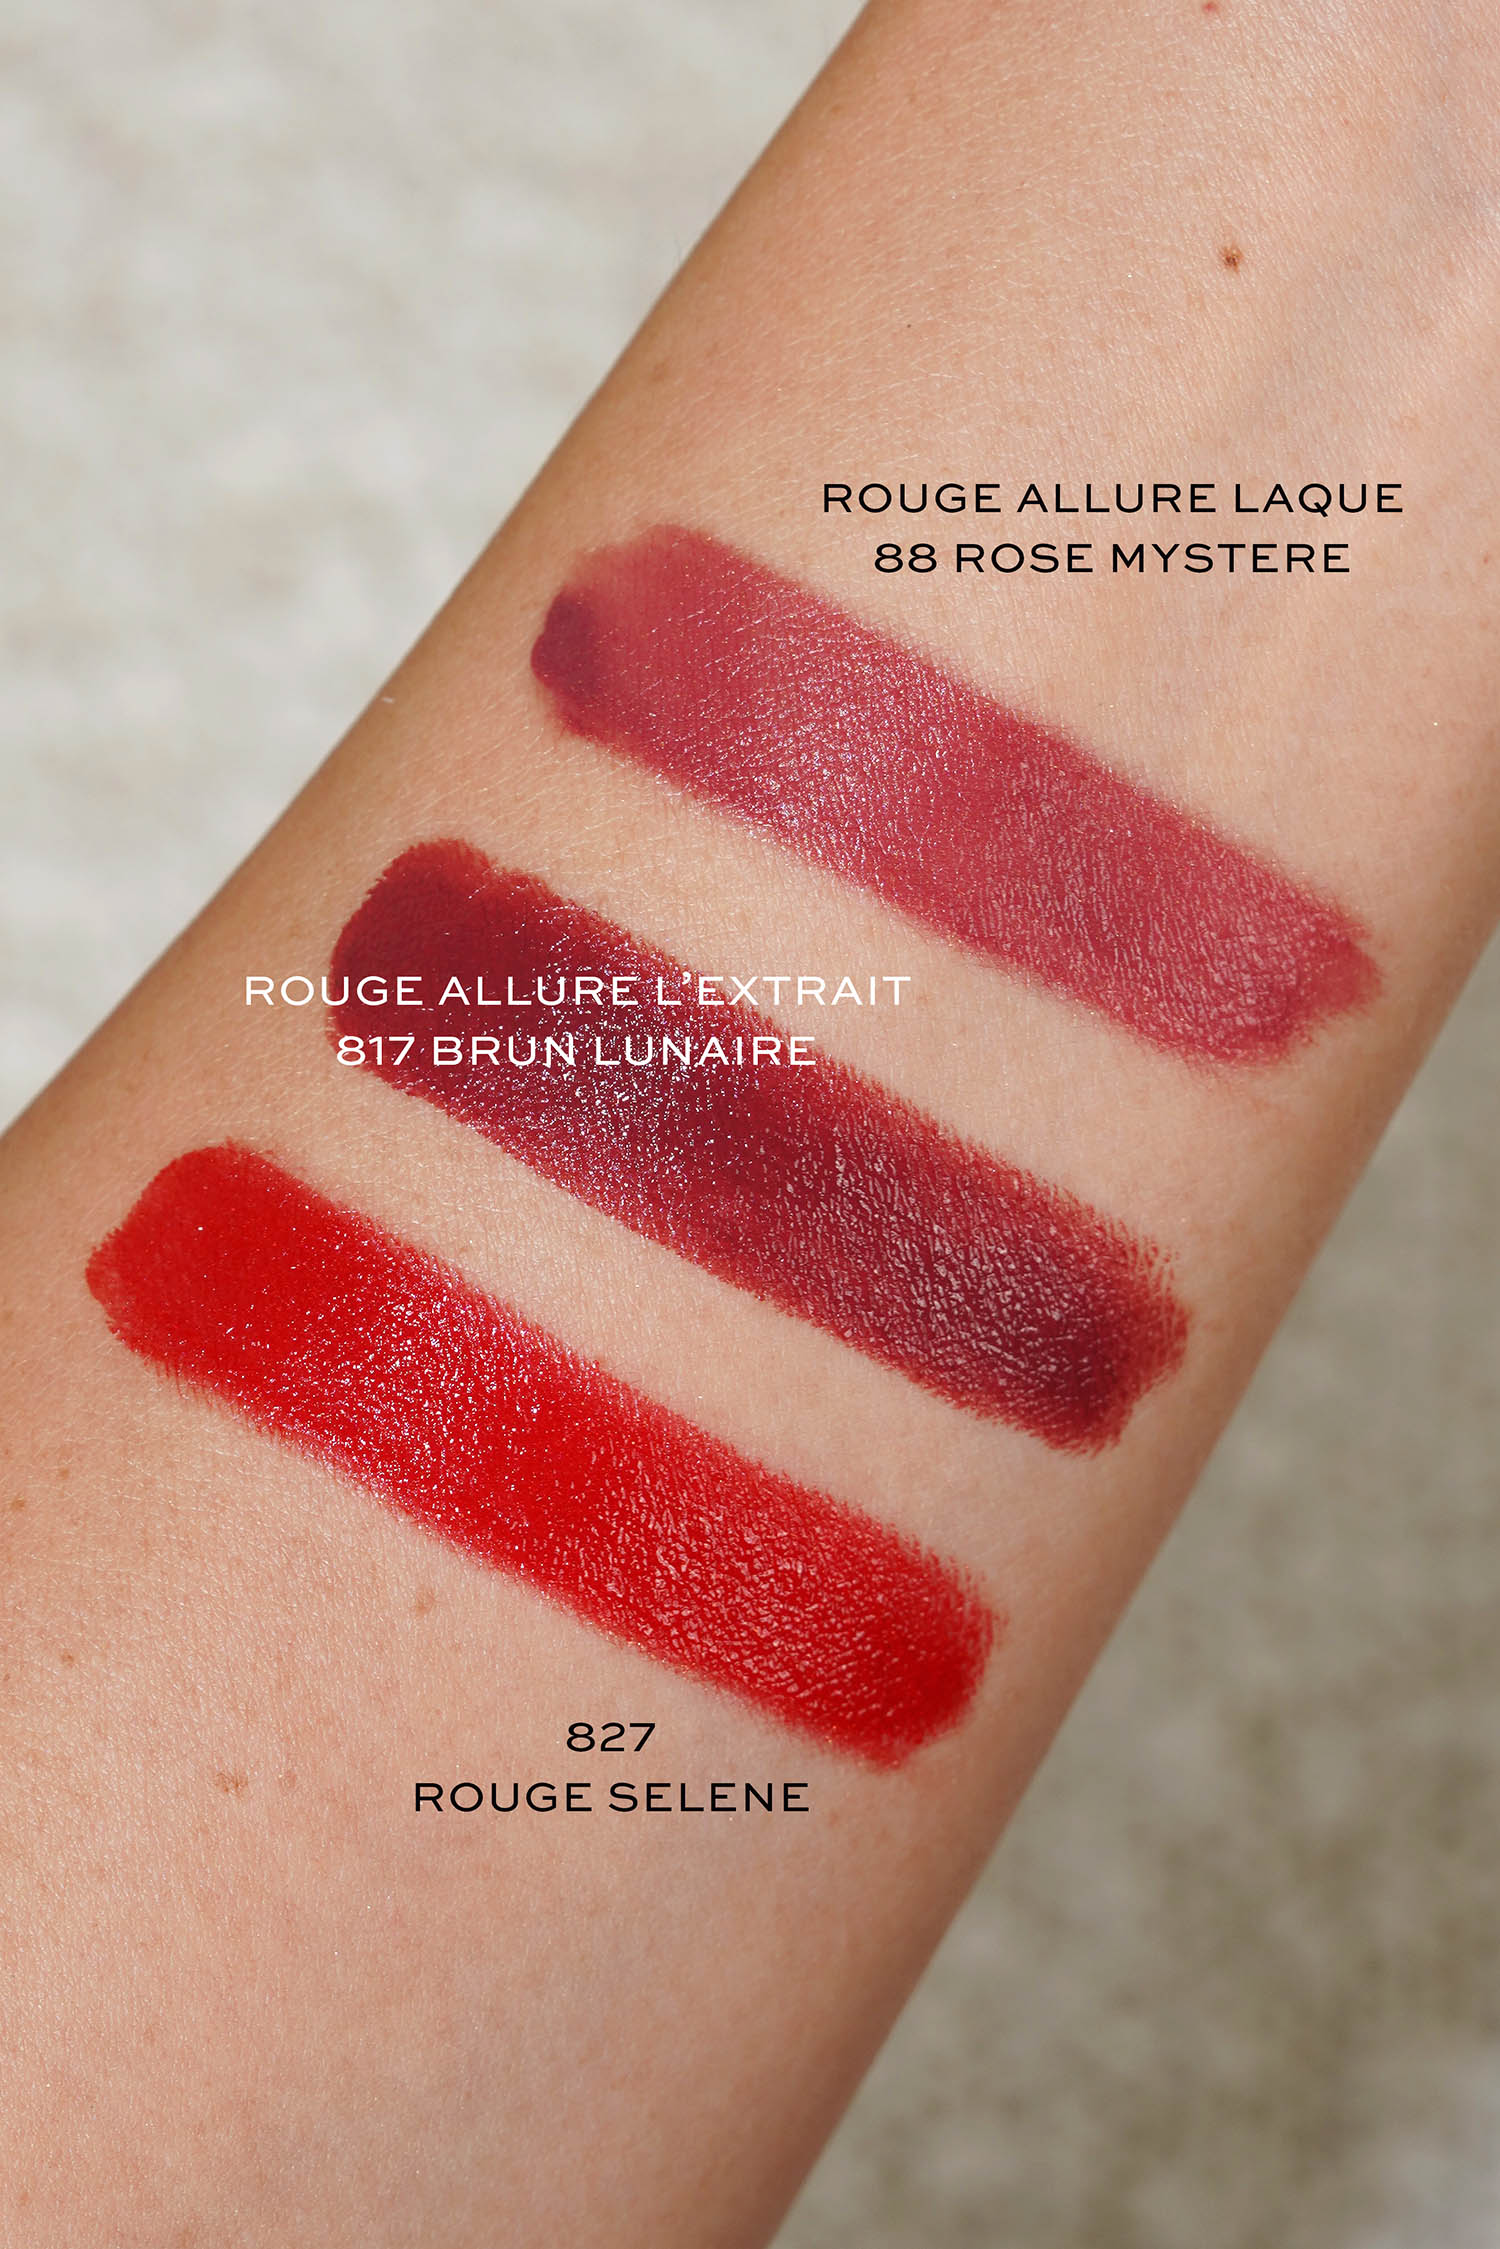 Chanel Rouge Coco Gloss, The Beauty Look Book